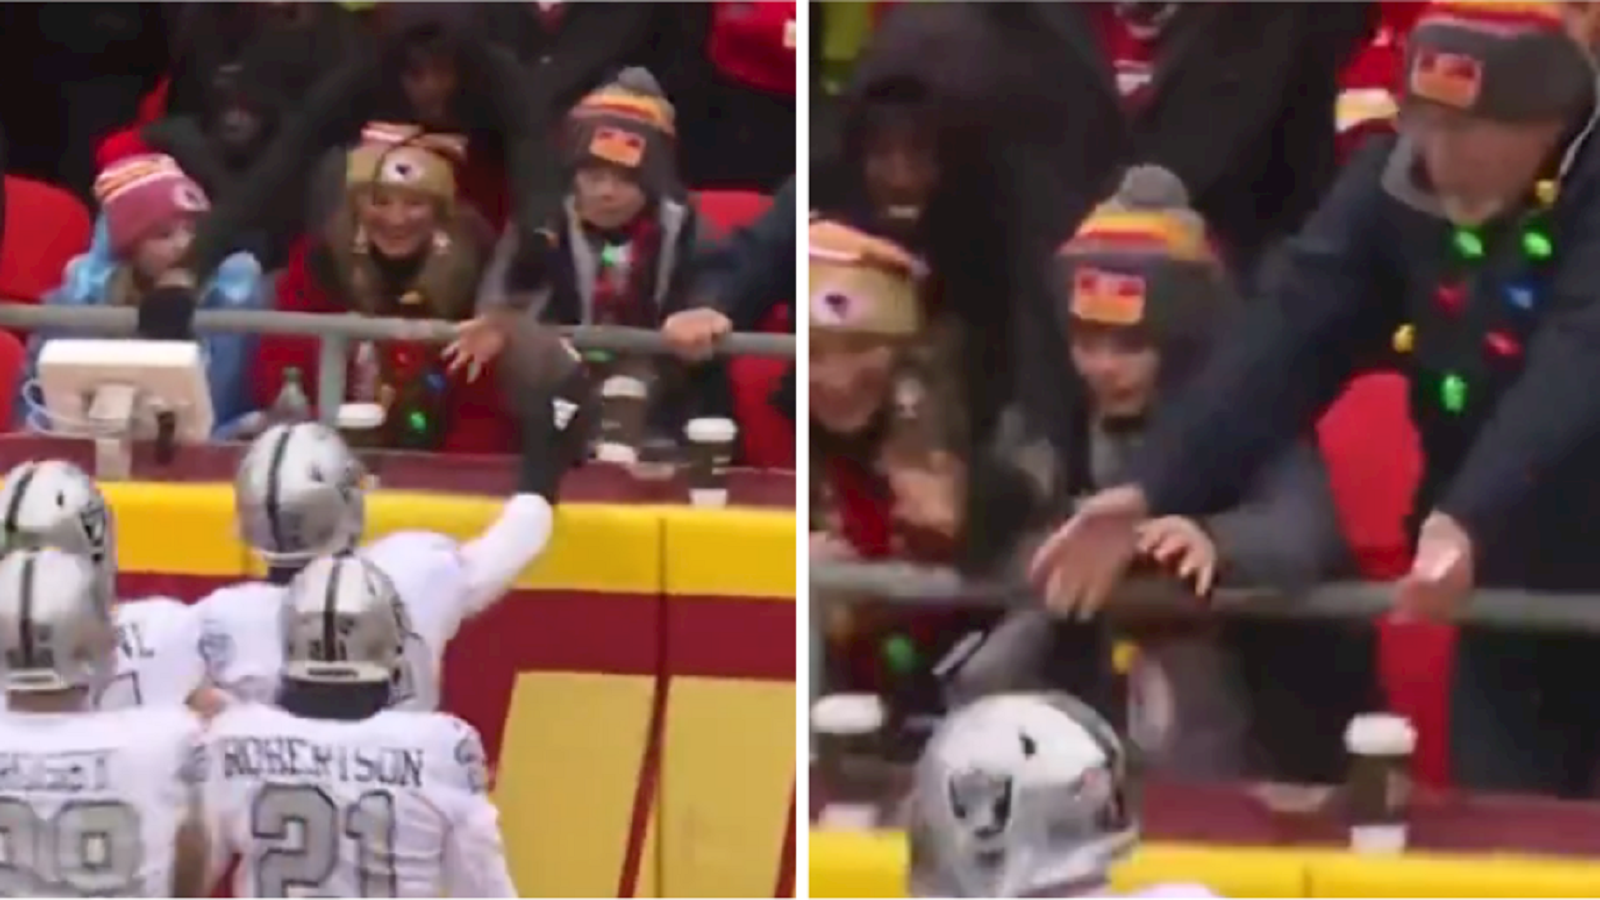 Raiders' Jack Jones goes full Grinch as he fakes out young Chiefs fan after  pick-six